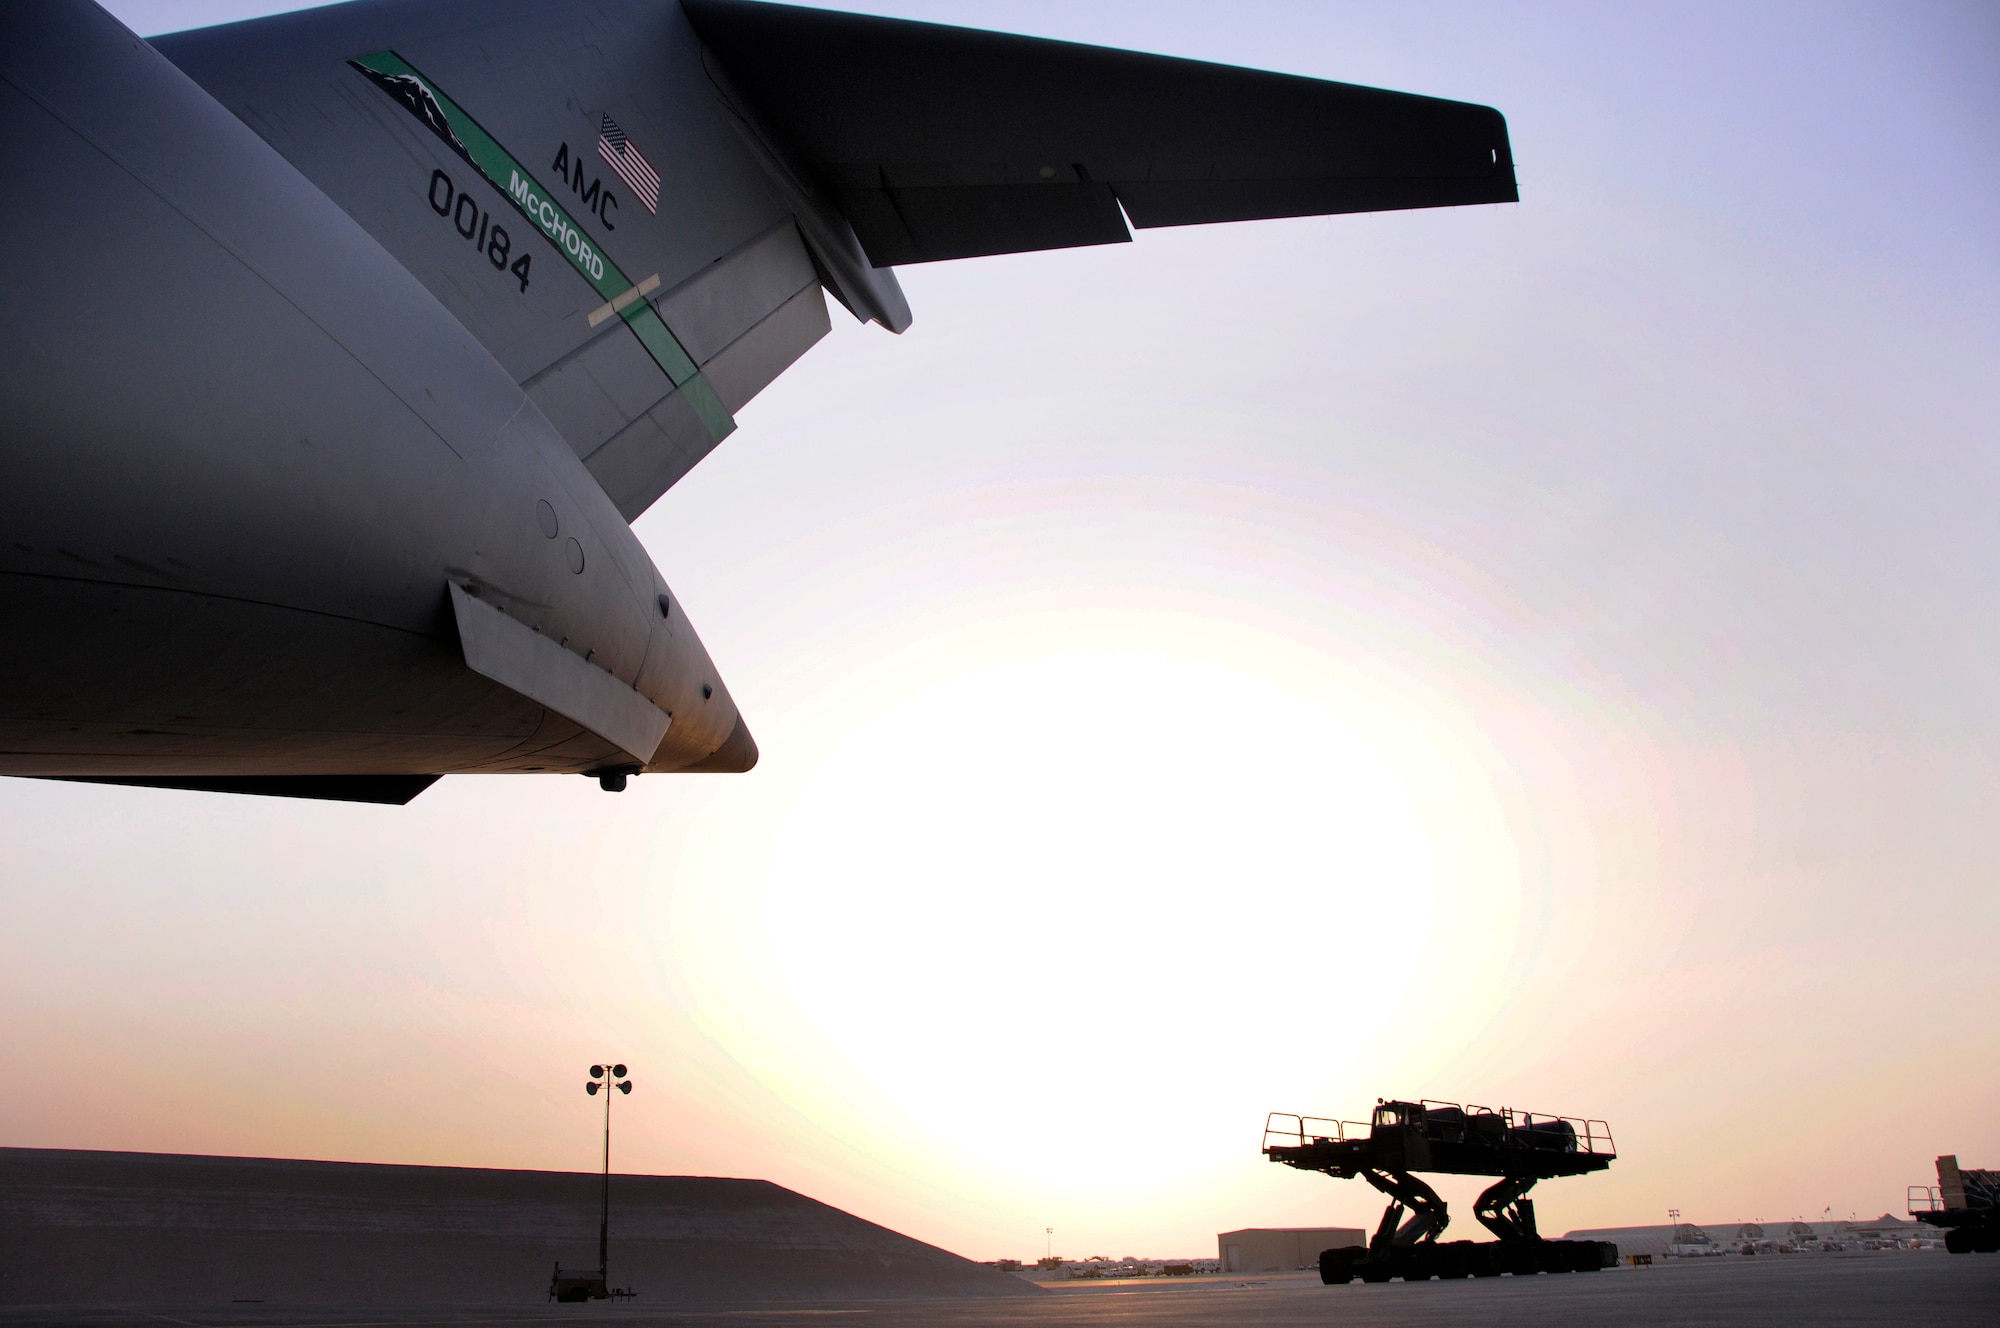 A 60K Loader is dwarfed by a C-17 from McChord Air Force Base, Wash., as the loader moves through the sunset to deliver cargo Aug. 8, 2008.  Two 60K Loaders filled with pallets are loaded onto the C-17 to deliver equipment and supplies to bases up range in support of Operations Iraqi Freedom and Enduring Freedom from an undisclosed air base in Southwest Asia.  (U.S. Air Force photo by Tech. Sgt. Michael Boquette/Released)